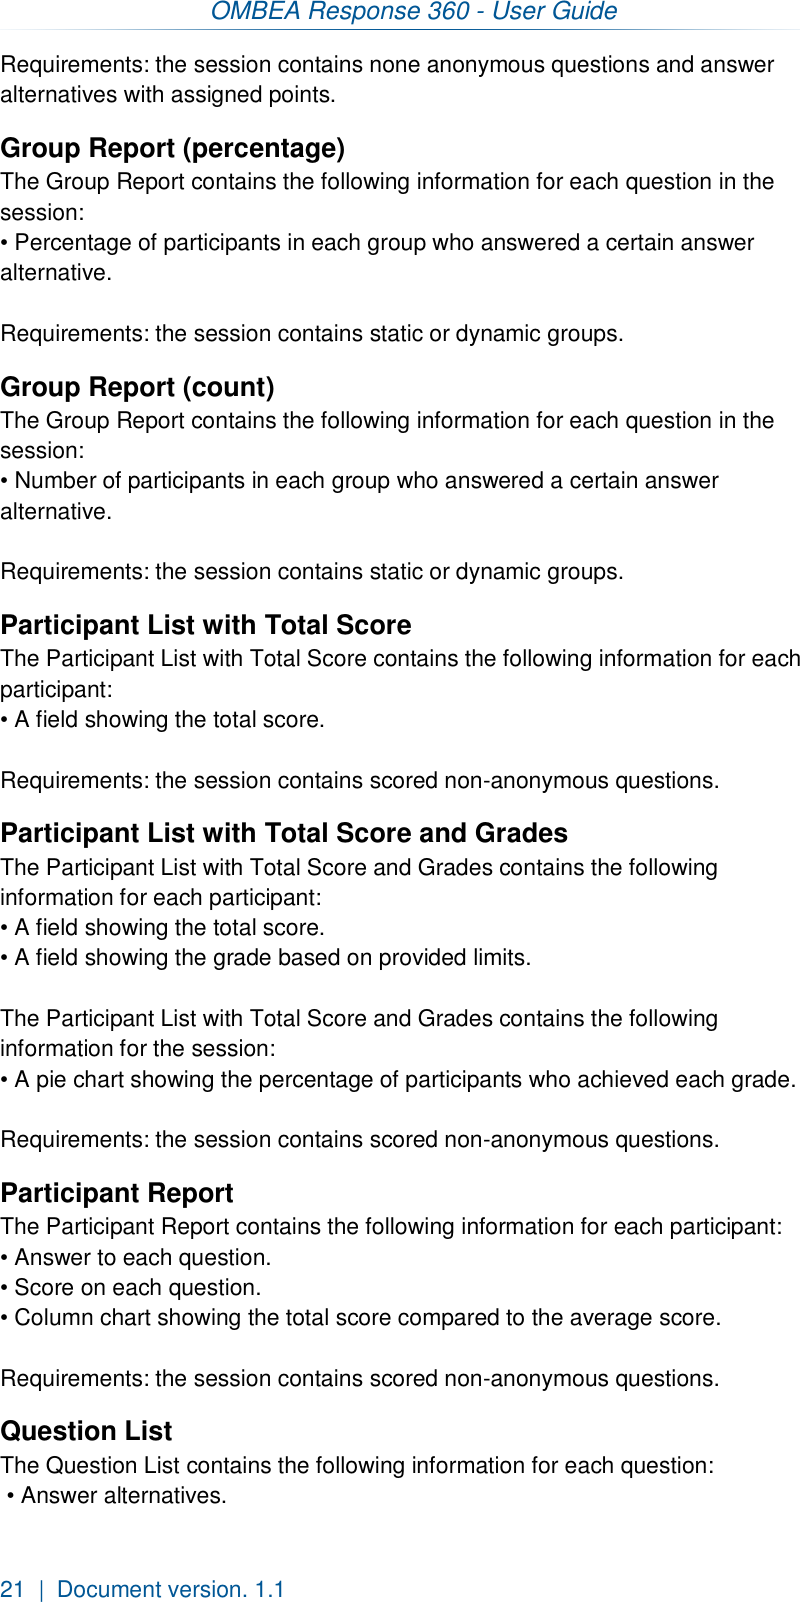 OMBEA Response 360 - User Guide  21  |  Document version. 1.1 Requirements: the session contains none anonymous questions and answer alternatives with assigned points. Group Report (percentage) The Group Report contains the following information for each question in the session: • Percentage of participants in each group who answered a certain answer alternative.  Requirements: the session contains static or dynamic groups. Group Report (count) The Group Report contains the following information for each question in the session: • Number of participants in each group who answered a certain answer alternative.  Requirements: the session contains static or dynamic groups. Participant List with Total Score The Participant List with Total Score contains the following information for each participant:  • A field showing the total score.   Requirements: the session contains scored non-anonymous questions. Participant List with Total Score and Grades The Participant List with Total Score and Grades contains the following information for each participant:  • A field showing the total score. • A field showing the grade based on provided limits.  The Participant List with Total Score and Grades contains the following information for the session: • A pie chart showing the percentage of participants who achieved each grade.   Requirements: the session contains scored non-anonymous questions. Participant Report The Participant Report contains the following information for each participant: • Answer to each question. • Score on each question.  • Column chart showing the total score compared to the average score.   Requirements: the session contains scored non-anonymous questions. Question List The Question List contains the following information for each question:  • Answer alternatives. 